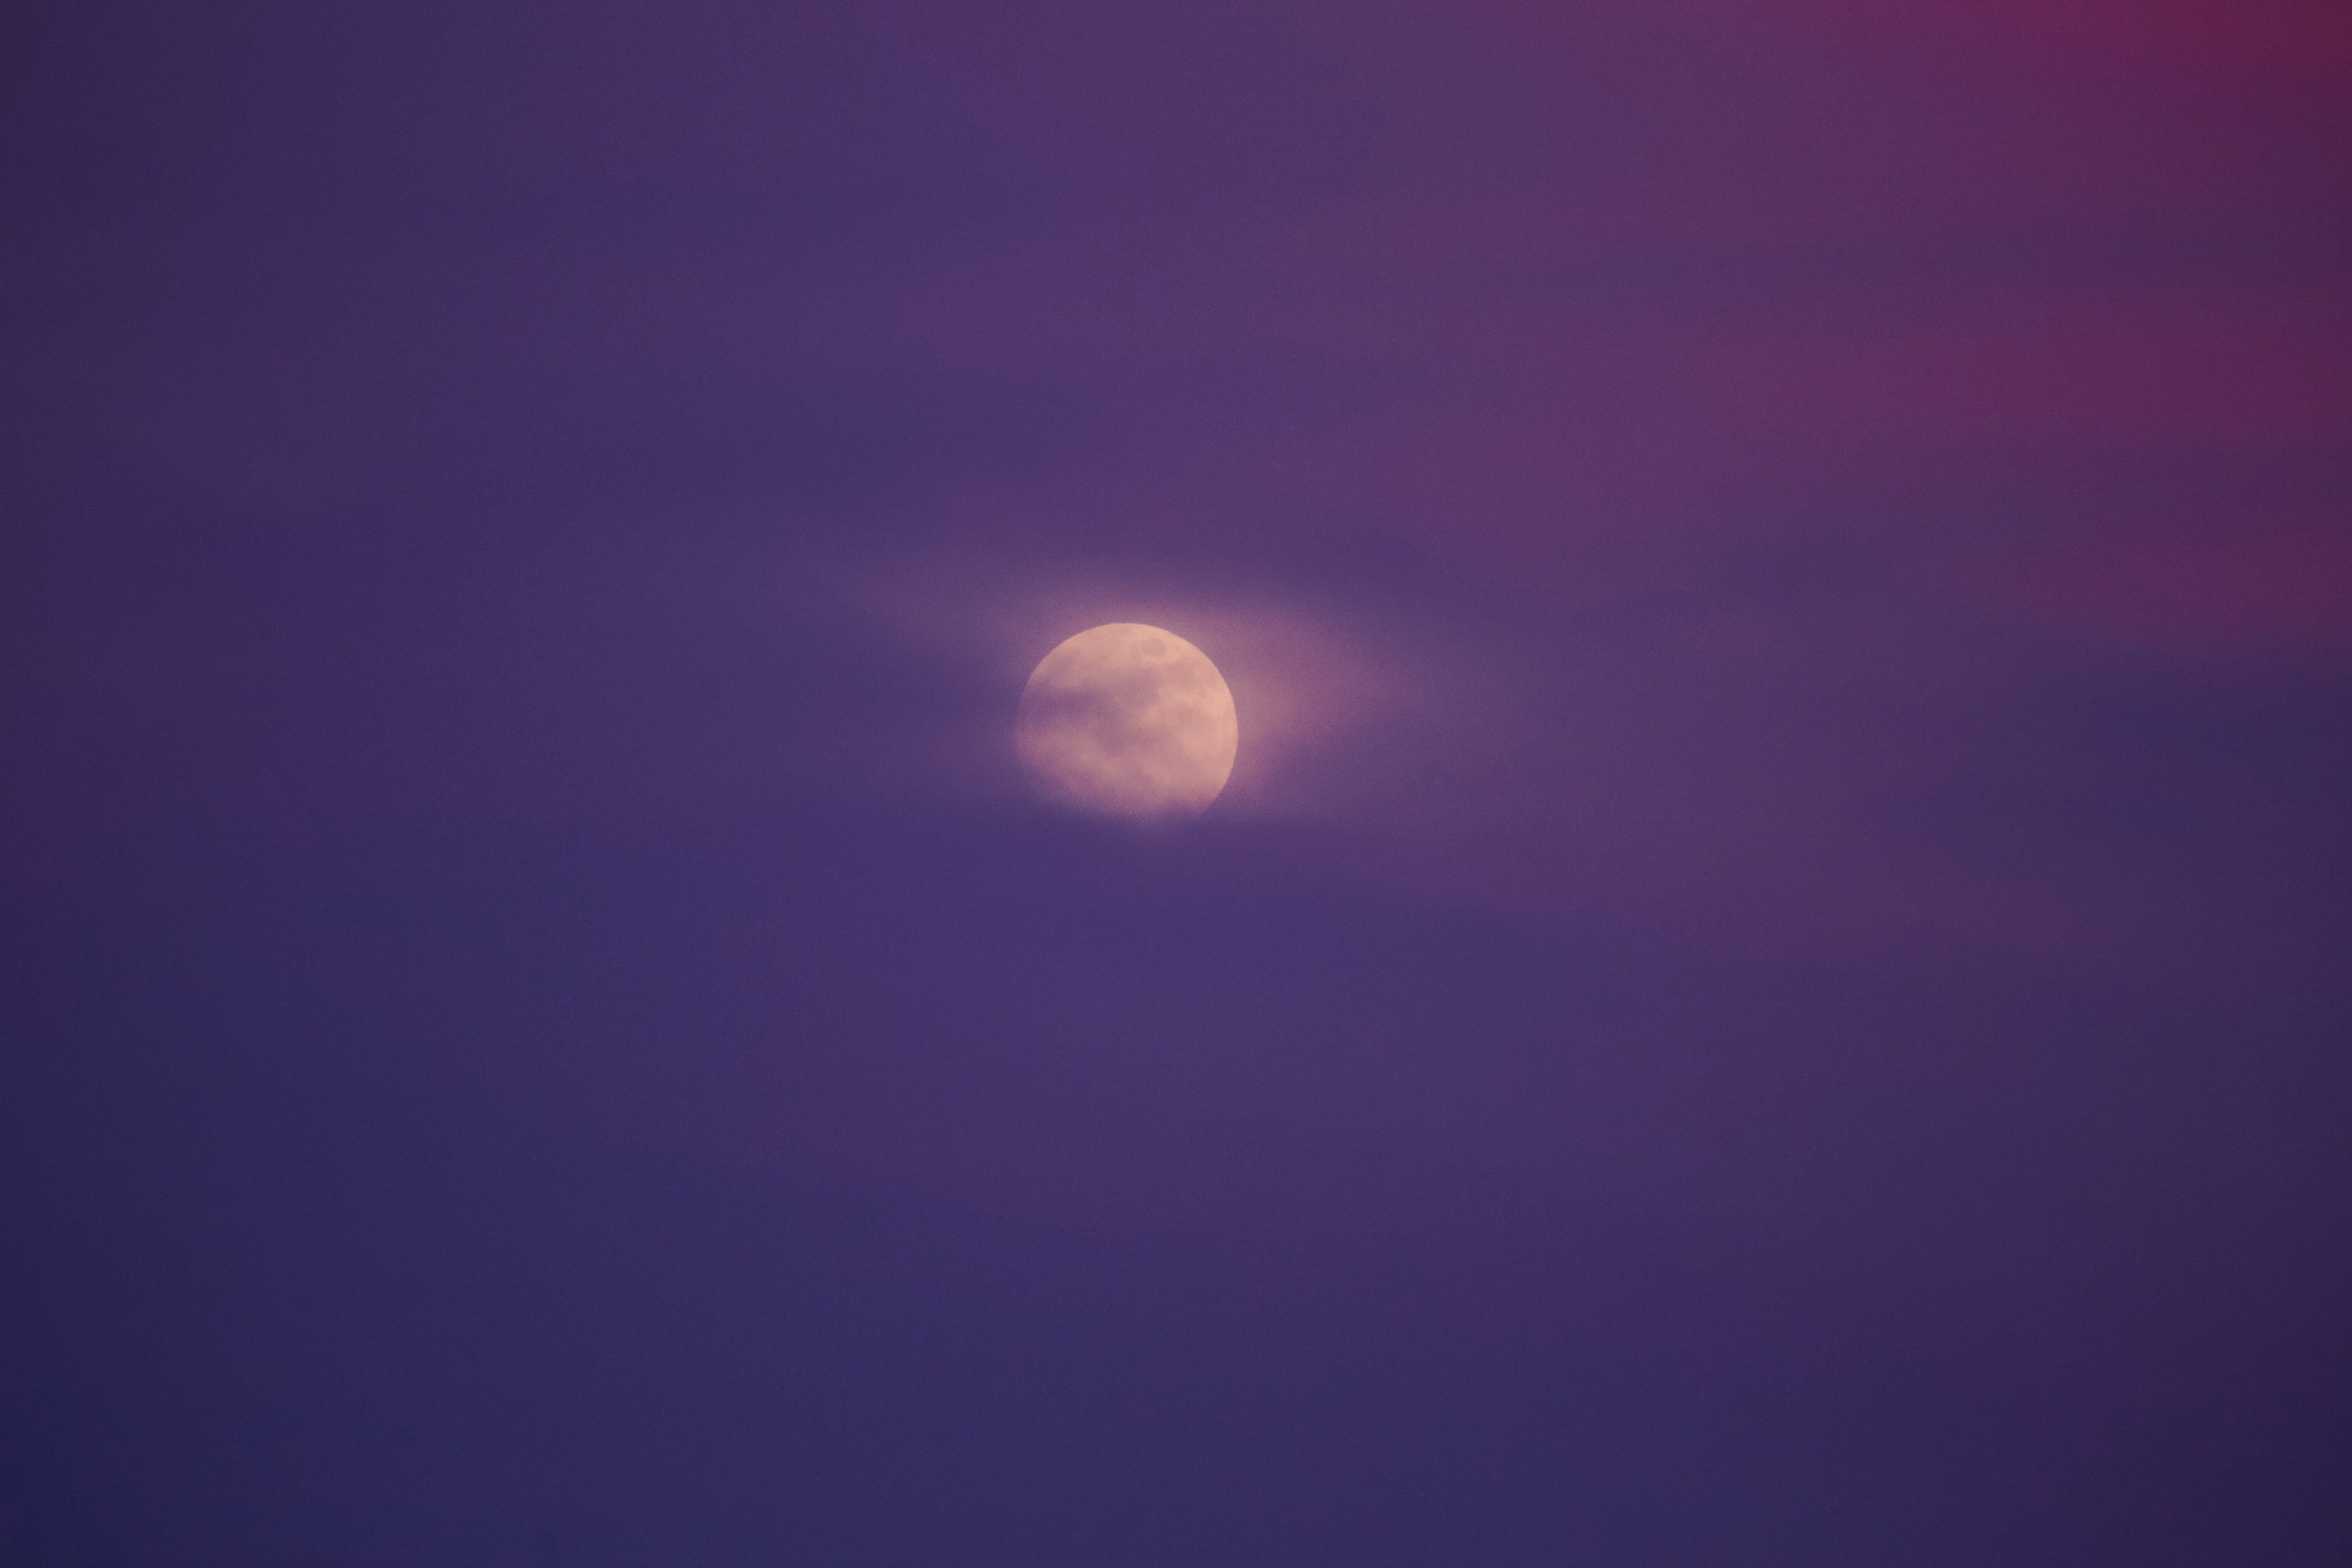 Pink moon doesn't actually look pink